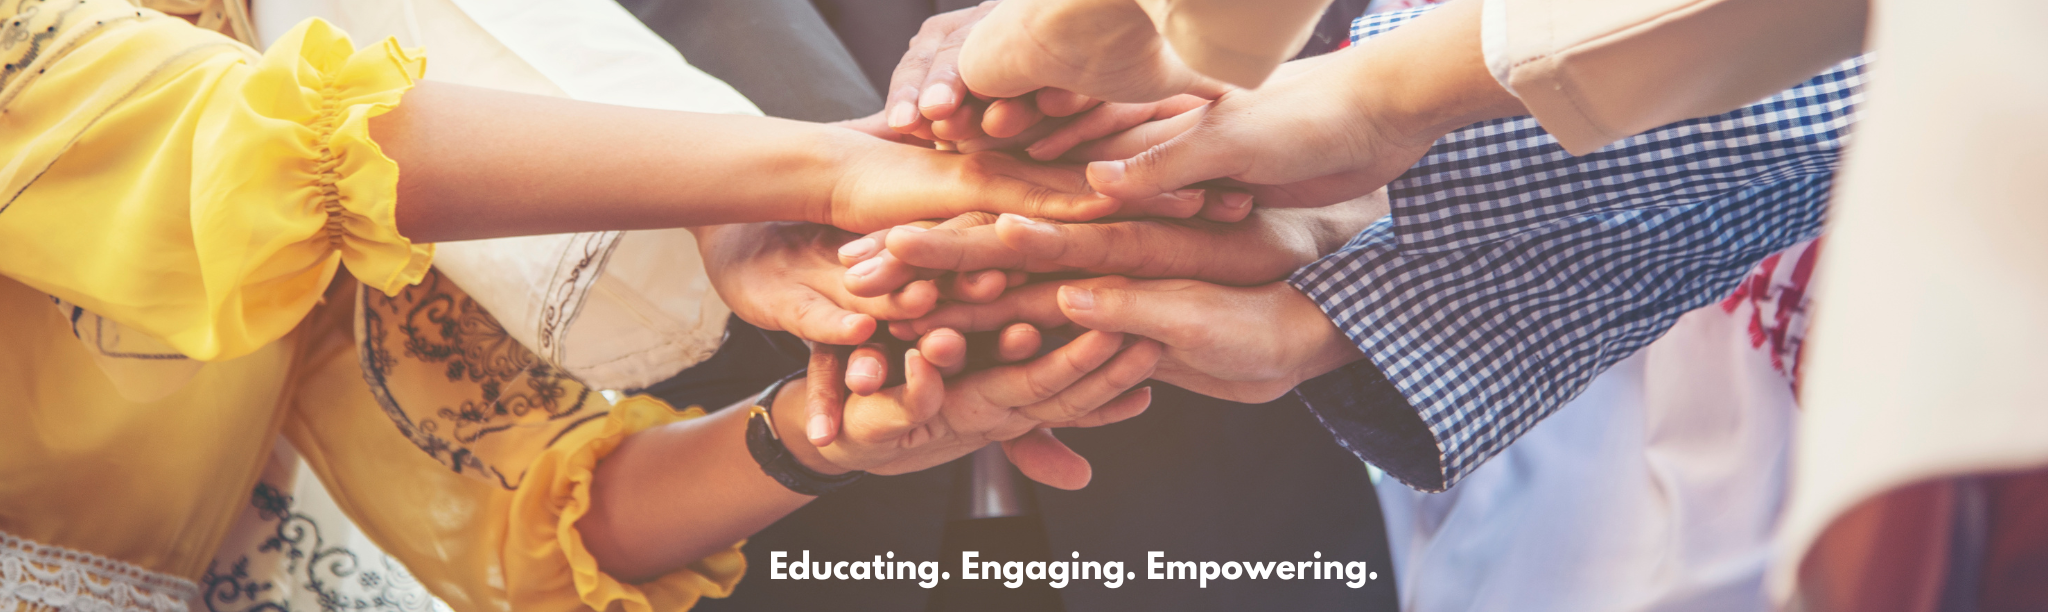 Diverse hands together. Engaging. Educating. Empowering.